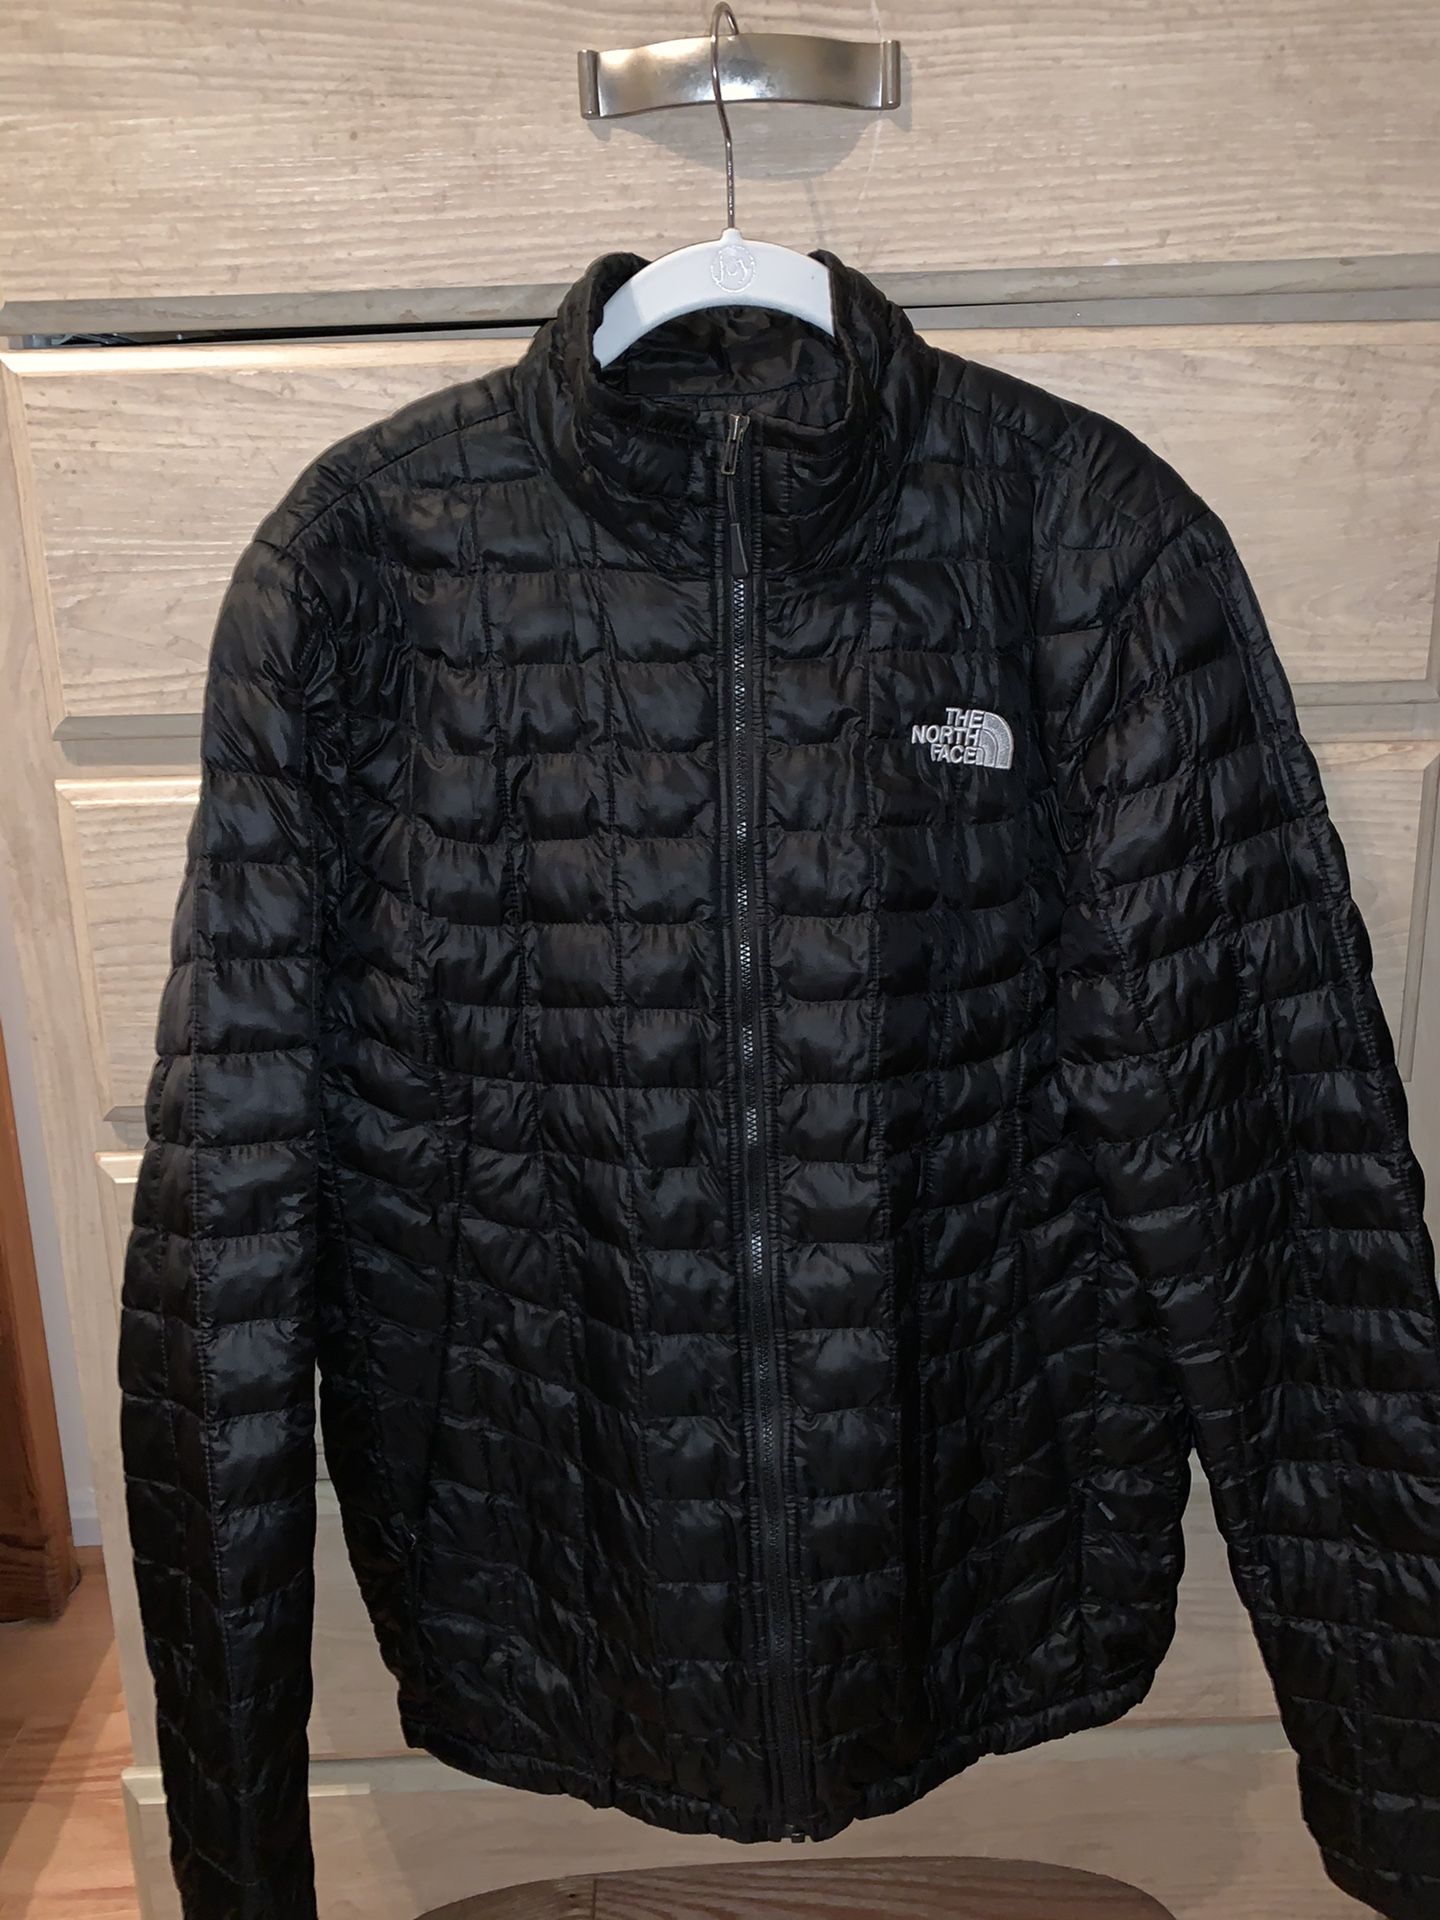 Men’s North Face Thermoball jacket